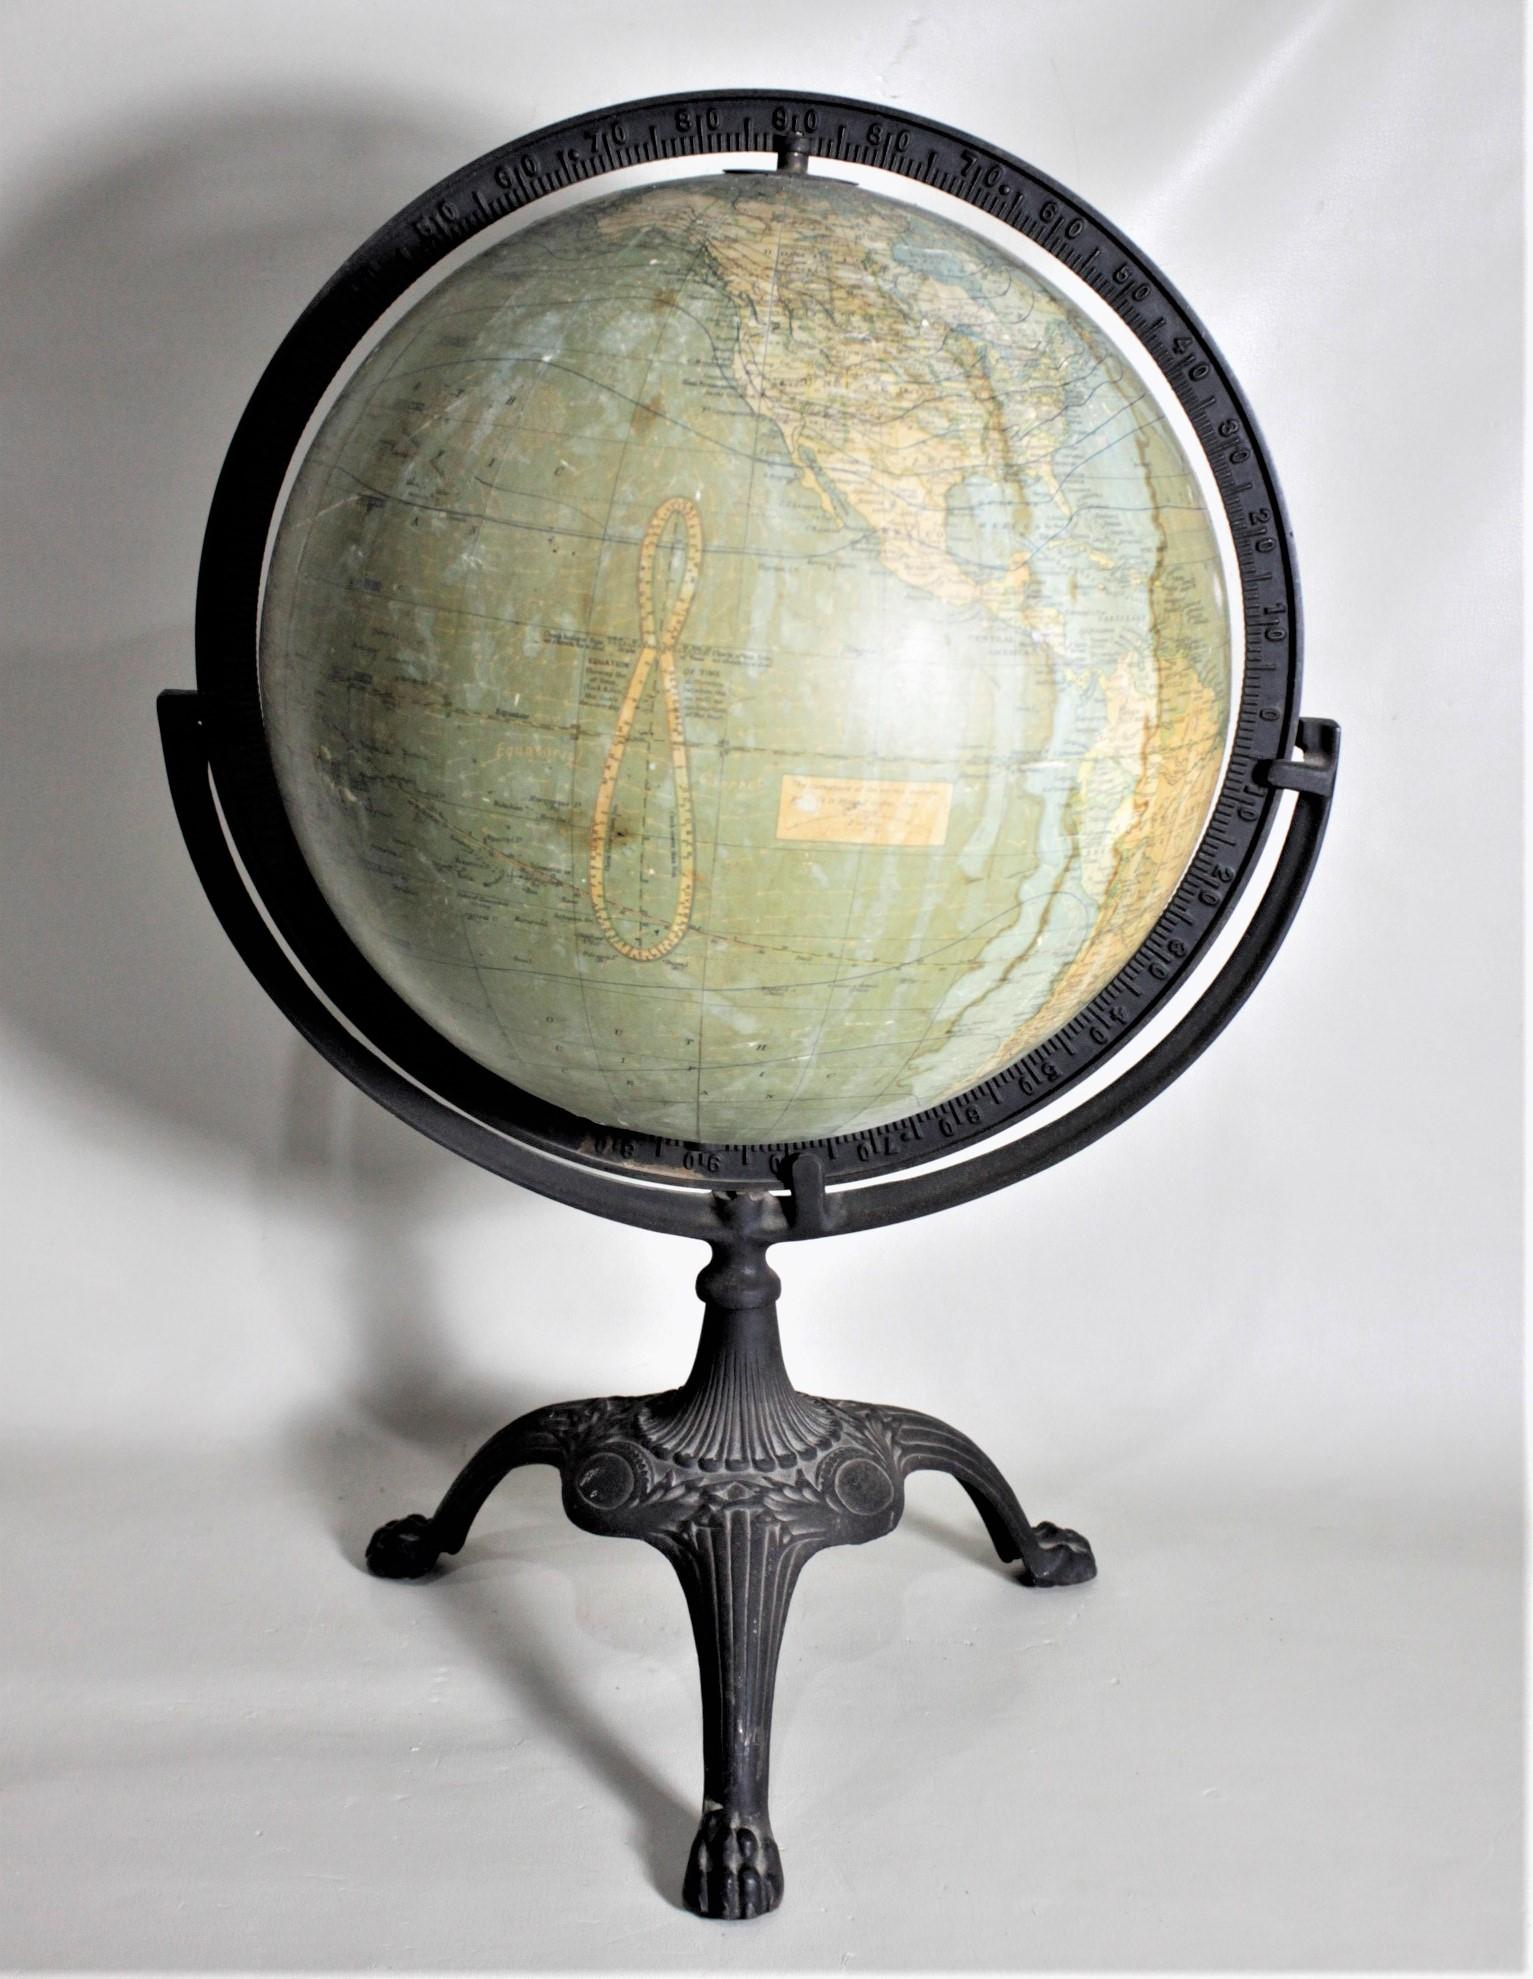 This antique desk globe was made by the C.S. Hammond & Co. of New York in approximately 1920 in the period Art Deco style. The globe sits inside a cast iron frame which rotates around, while permitting the globe to spin on its axis. The cast iron